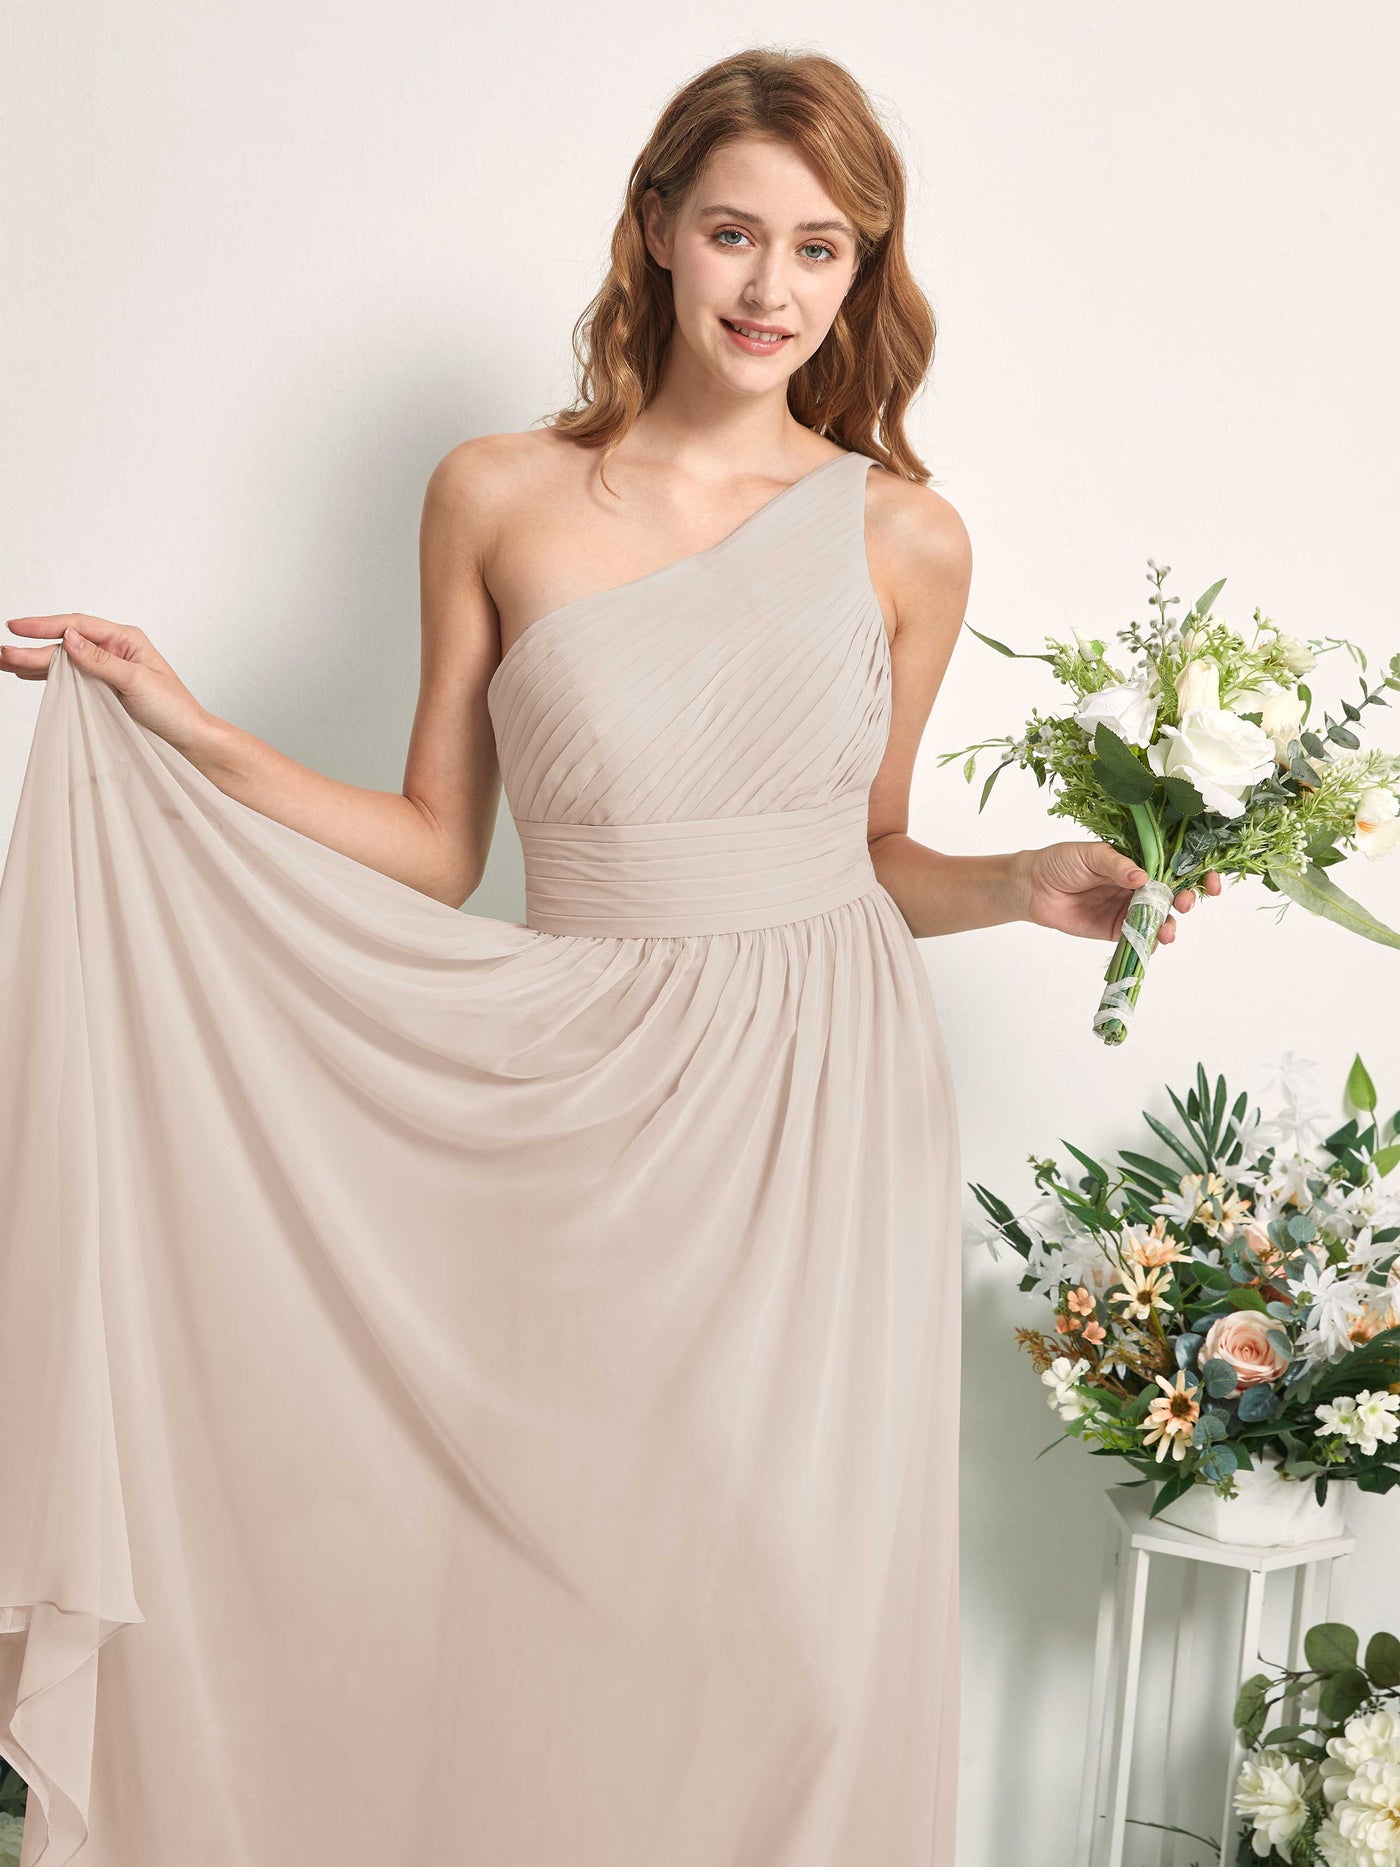 Bridesmaid Dress A-line Chiffon One Shoulder Full Length Sleeveless Wedding Party Dress - Champagne (81226716)#color_champagne